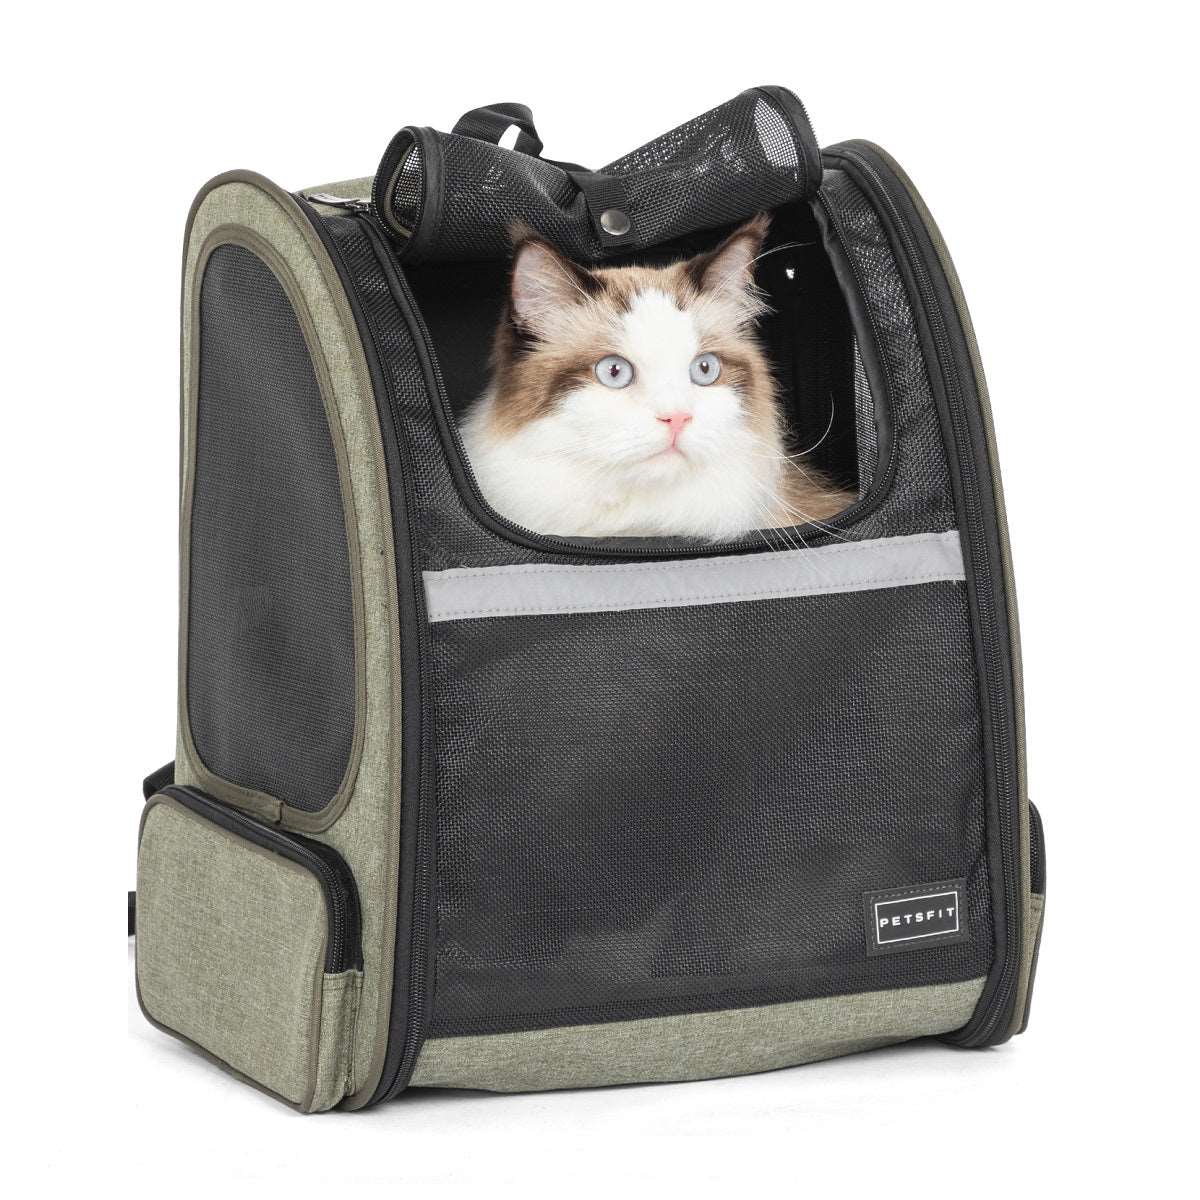 Petsfit-Dog-and-Cat-Backpack-Carrier-Expandable-with-Great-Ventilation-02